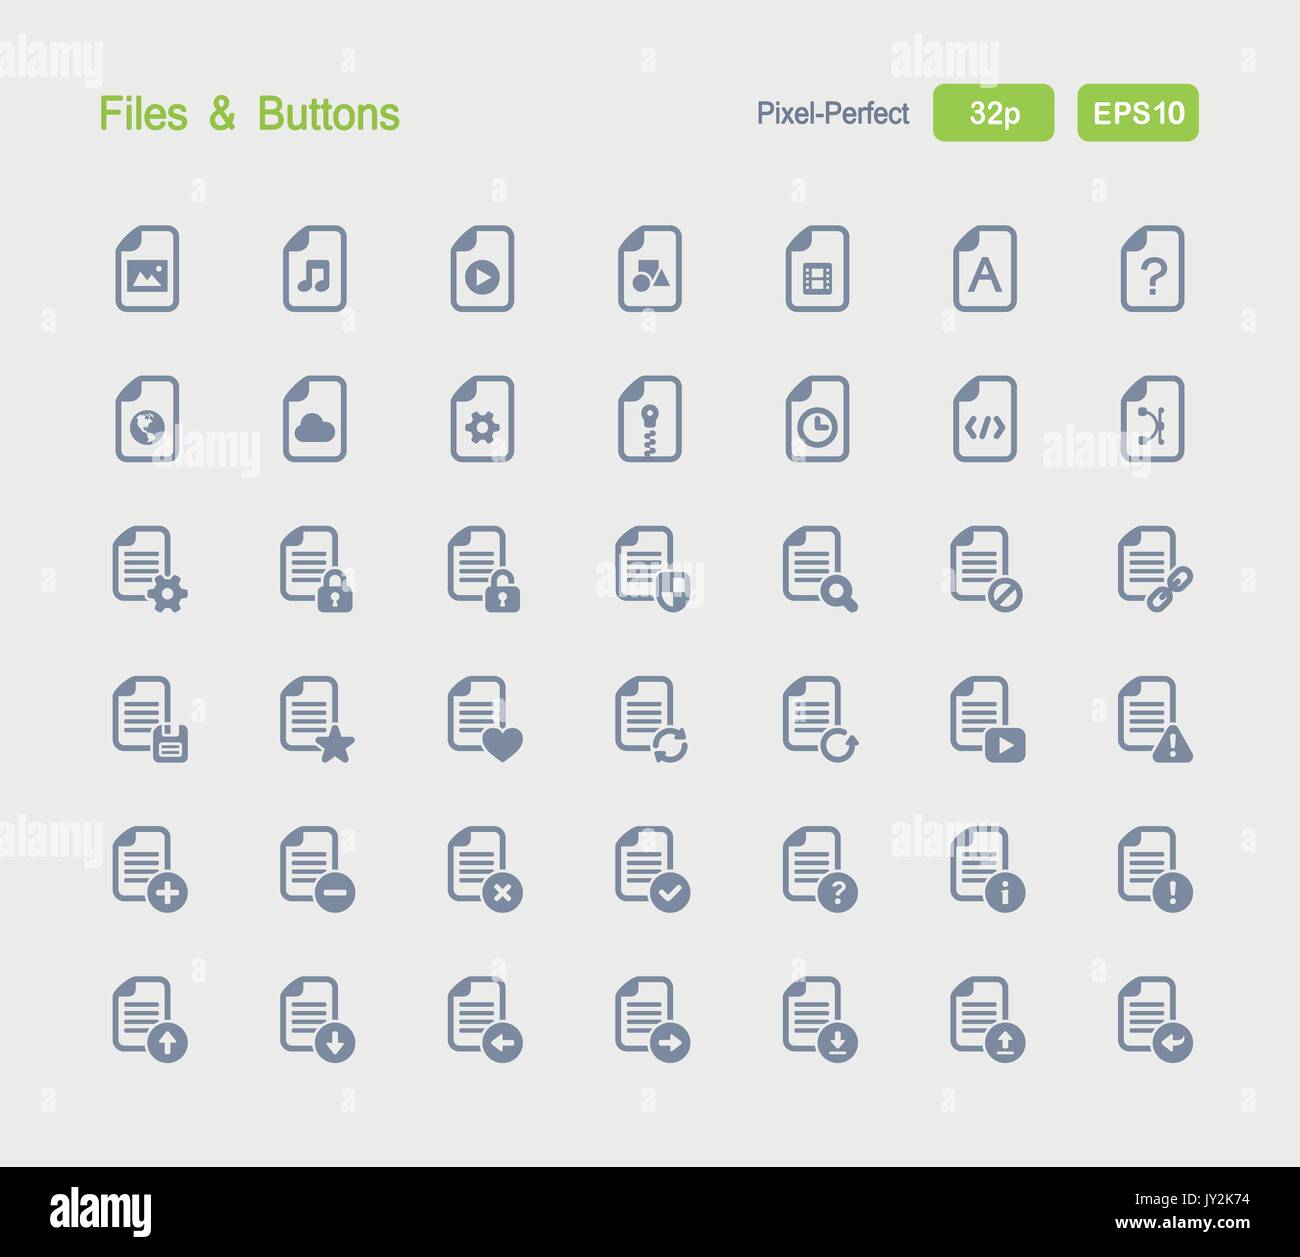 A set of 42 professional, pixel-perfect vector icons designed on a 32x32 pixel grid. Stock Vector